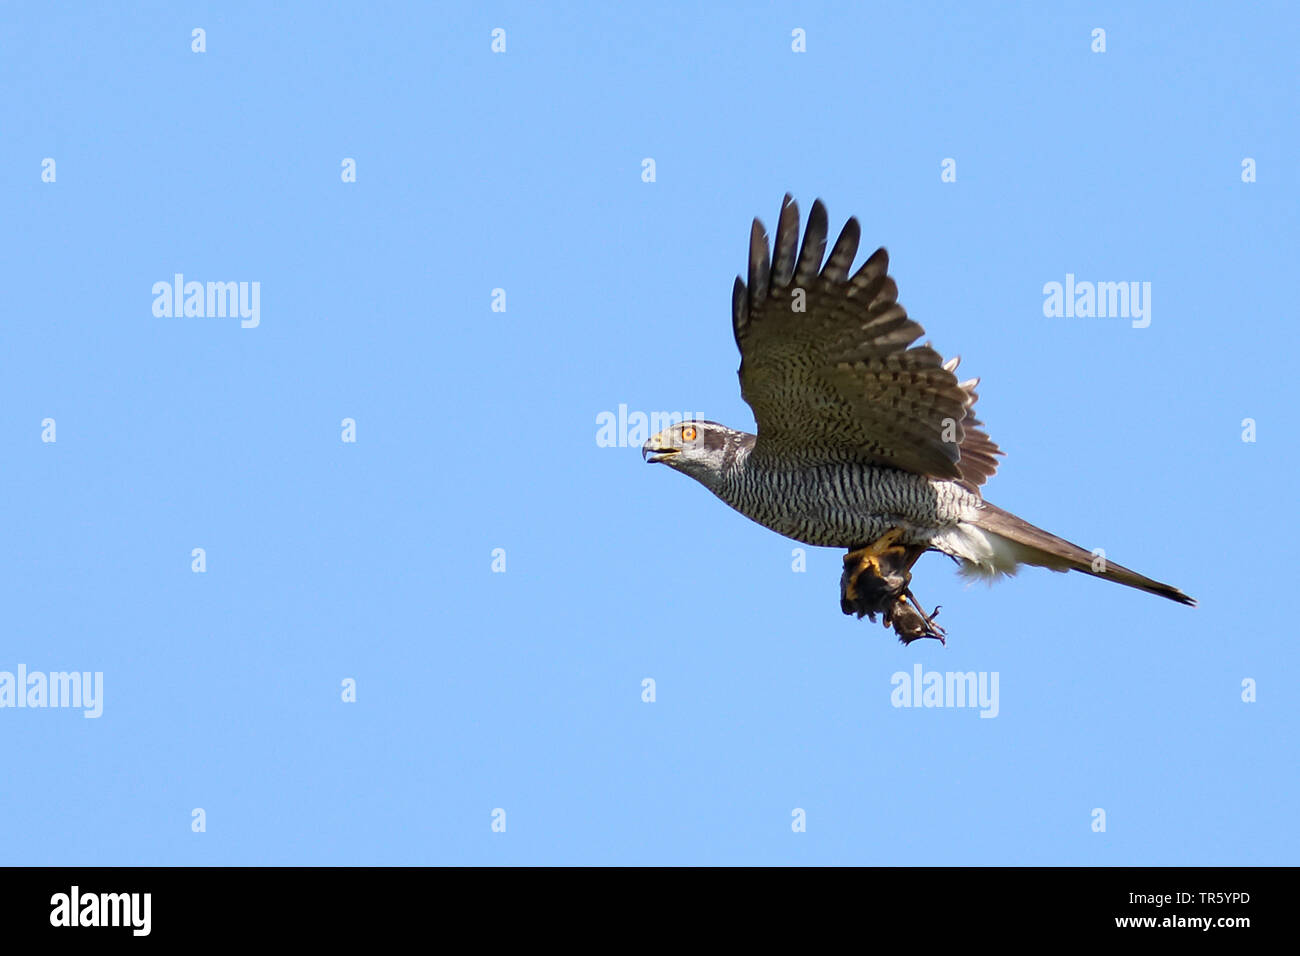 northern goshawk (Accipiter gentilis), flying with a starling in the talons, side view, Netherlands, Texel Stock Photo